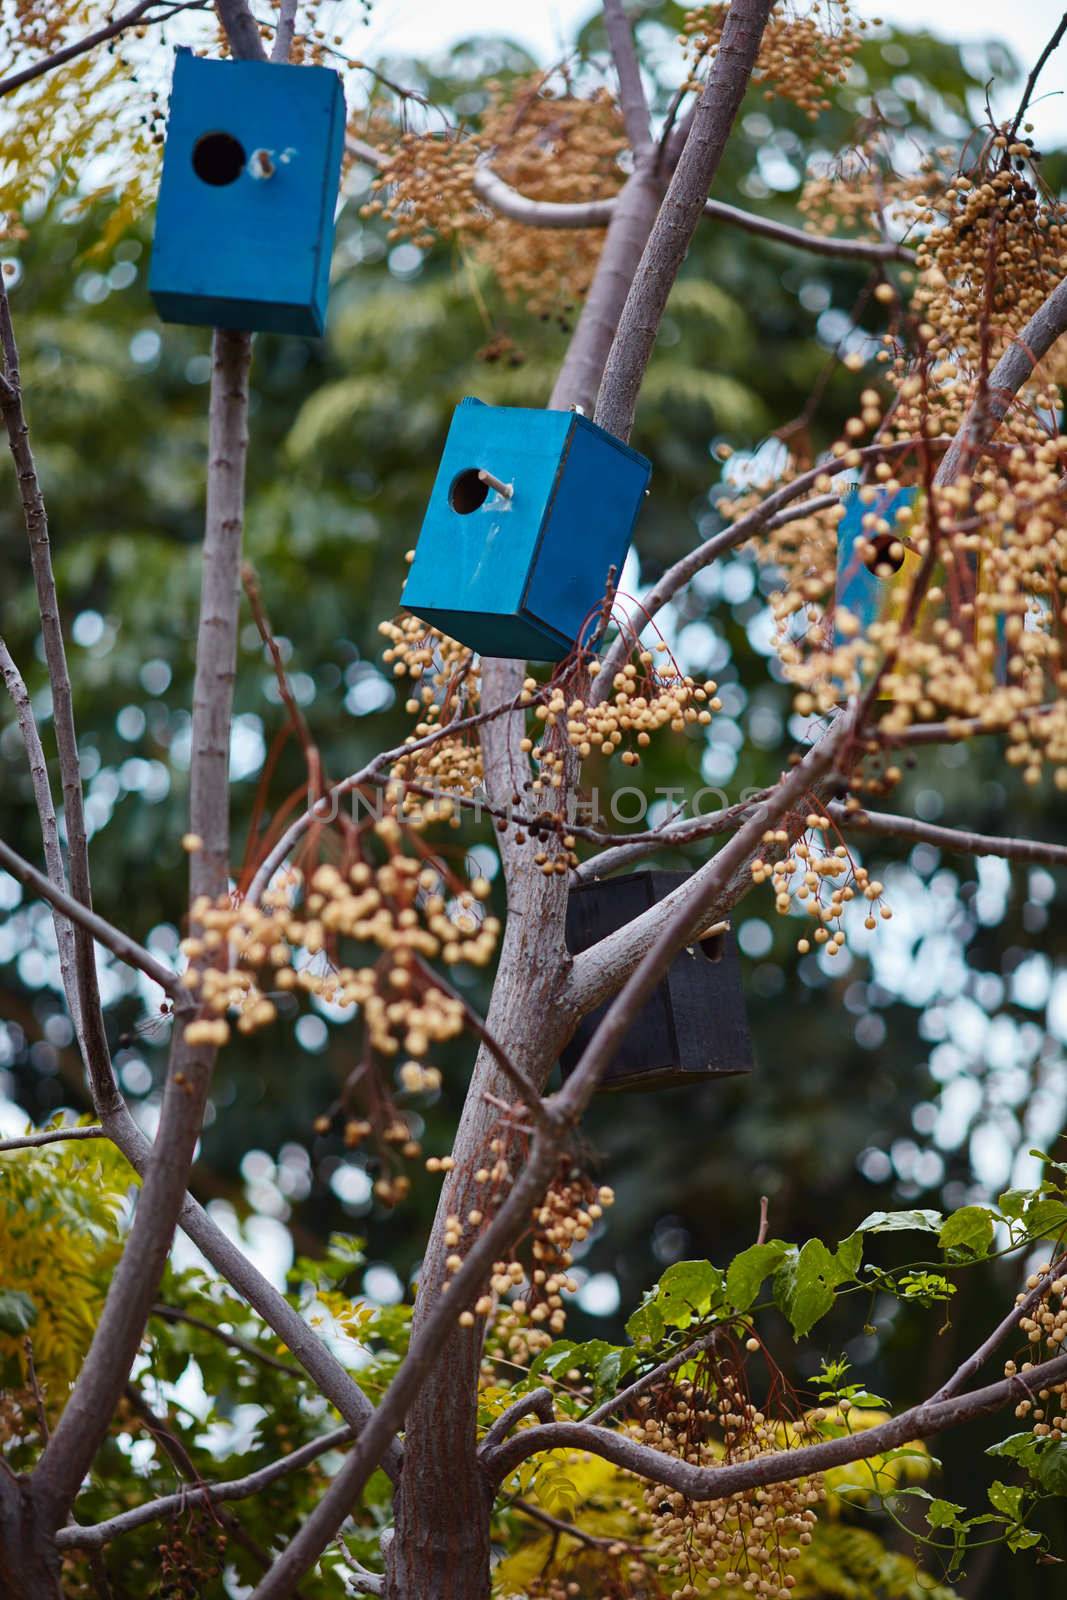 Many colorful bird houses on the tree